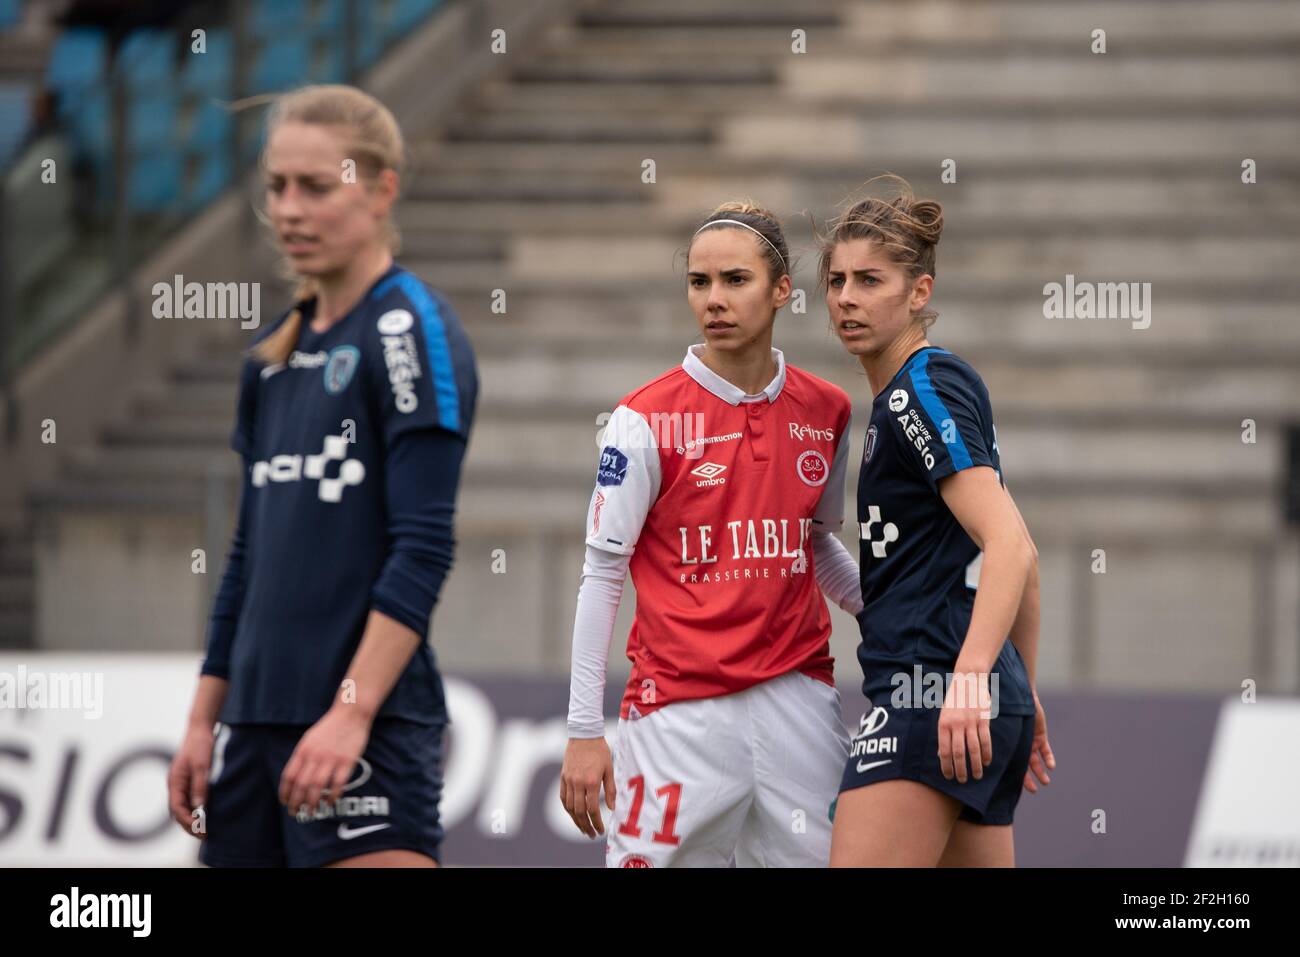 Tanya Romanenko of Stade de Reims and Camille Catala of Paris FC during the  Women's French championship D1 Arkema football match between Paris FC and  Stade de Reims on February 22, 2020